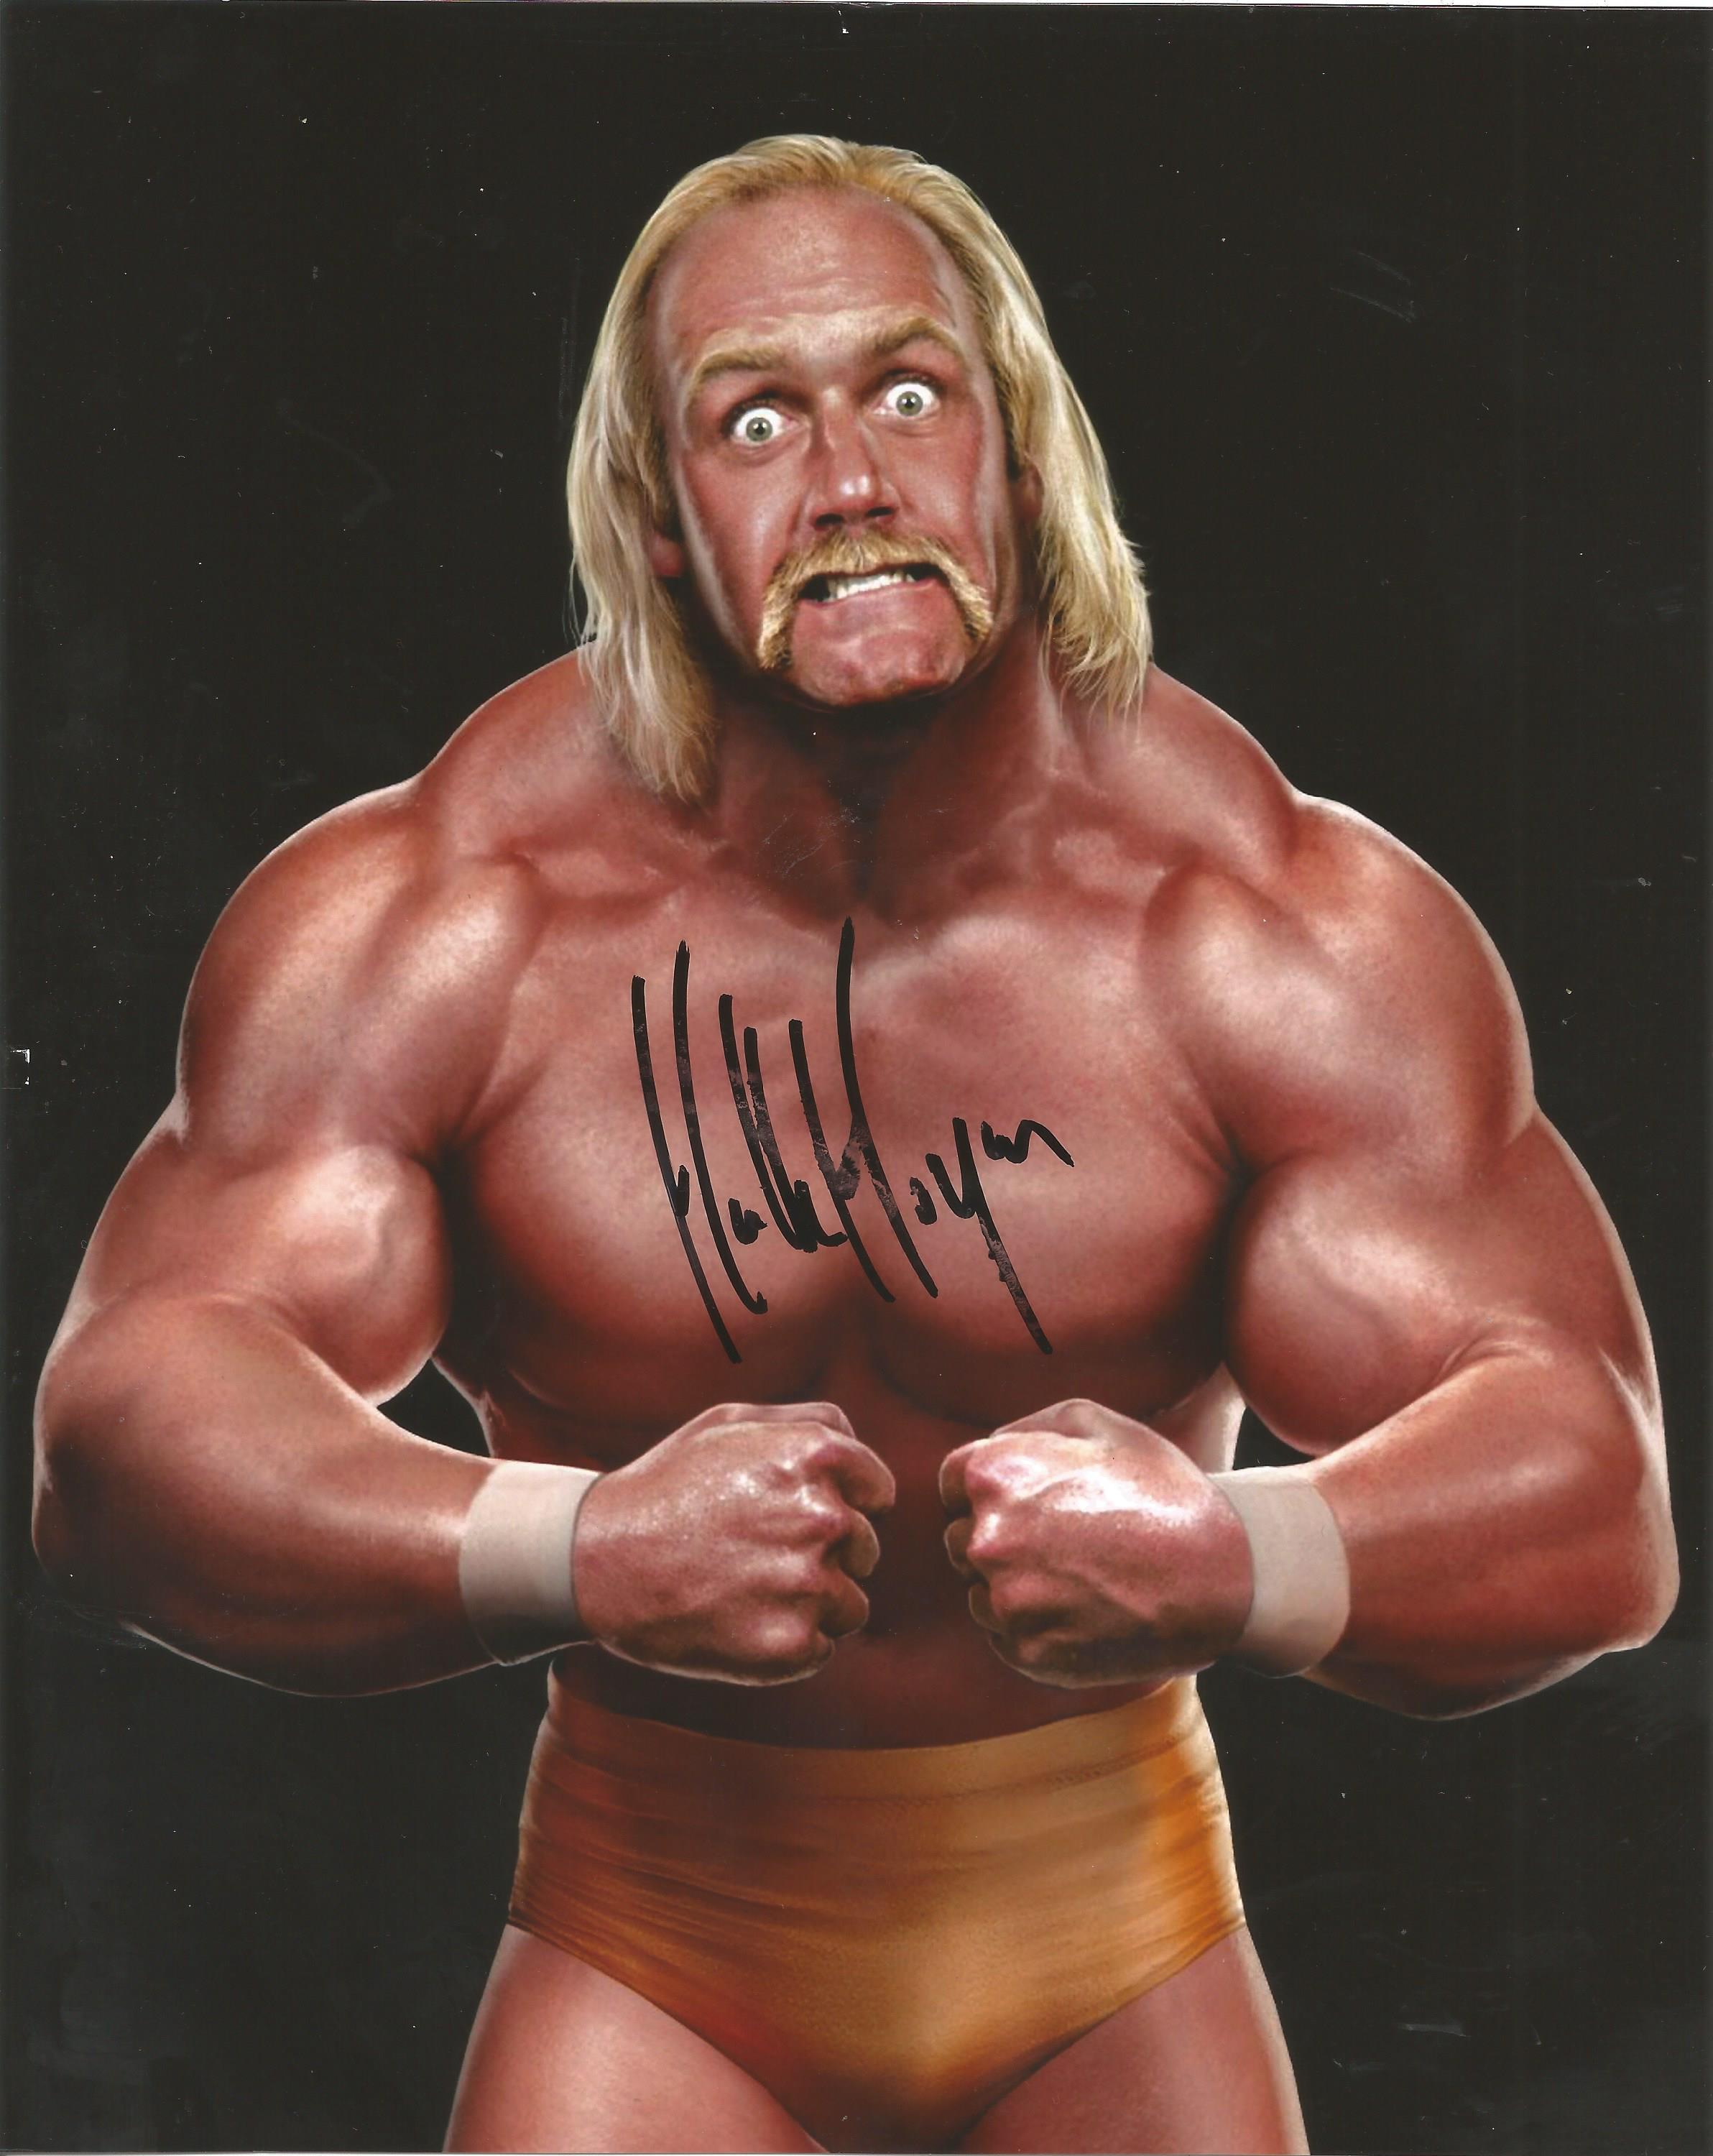 Hulk Hogan signed 10 x 8 colour Wrestling Portrait Photo, from in person collection autographed at